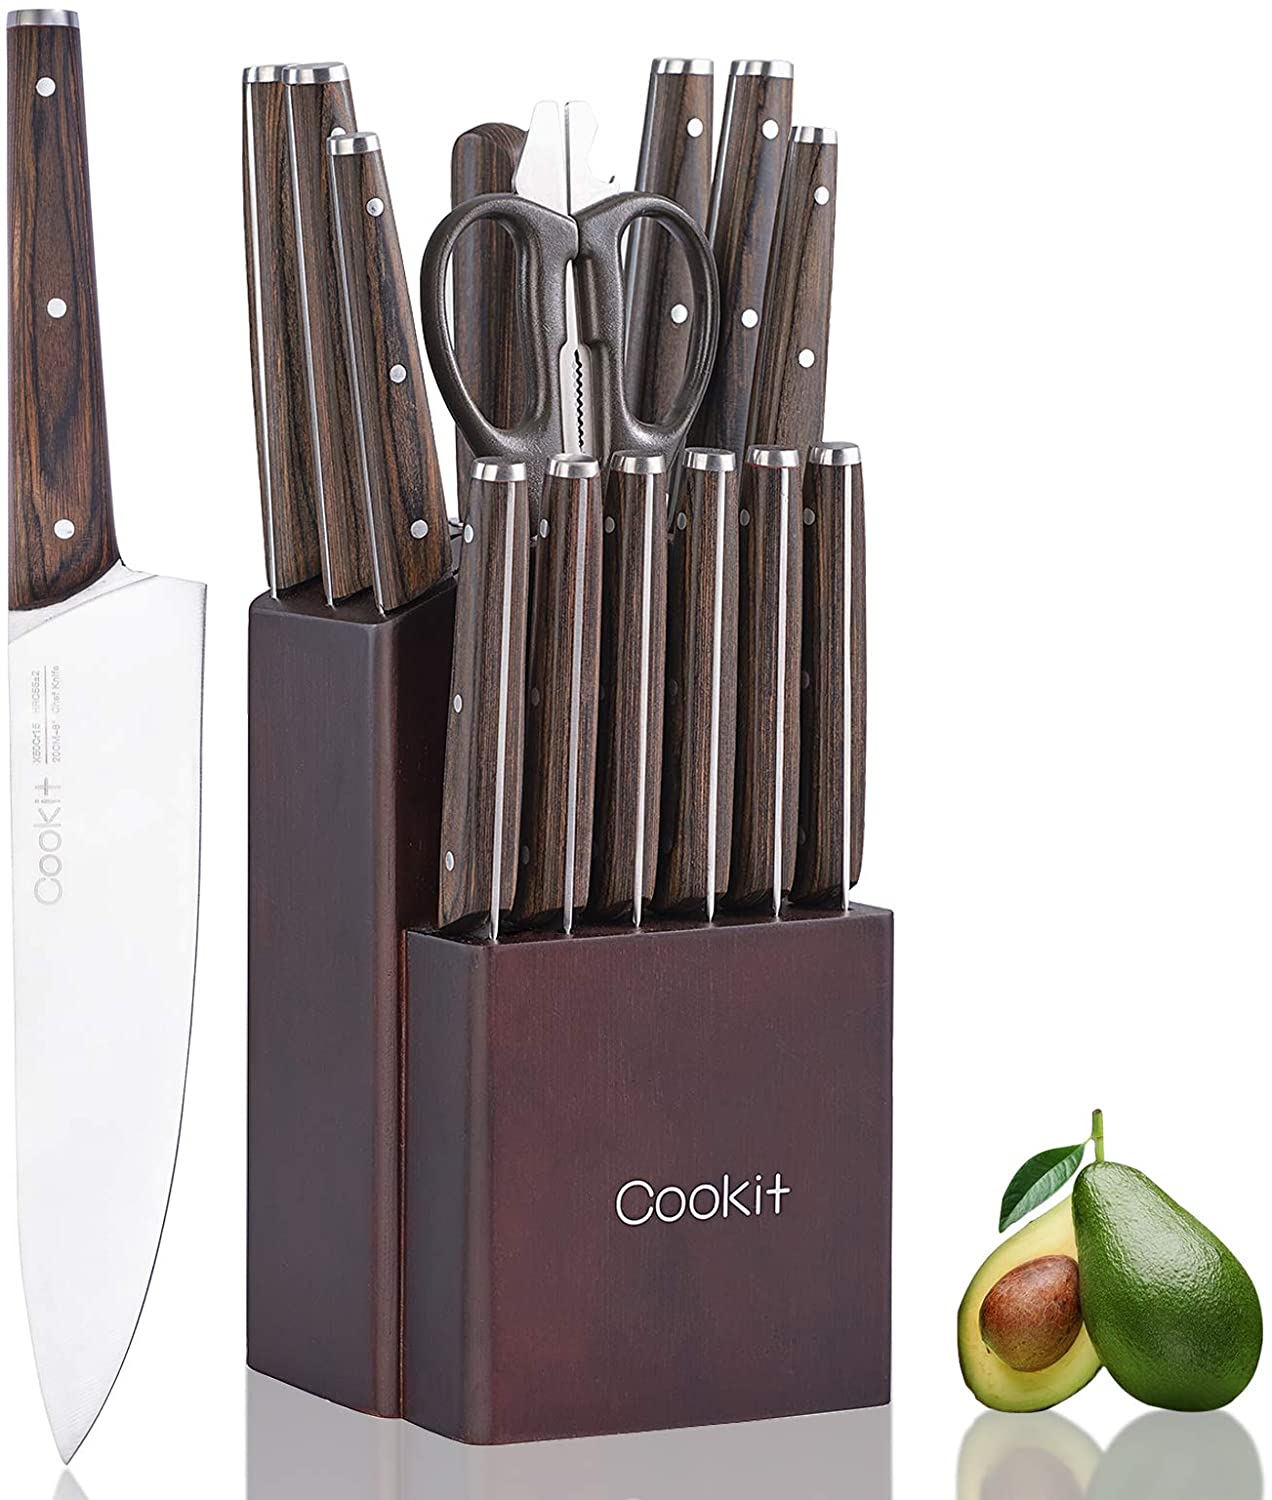 Dropship Pioneer Signature 14-Piece Stainless Steel Knife Block